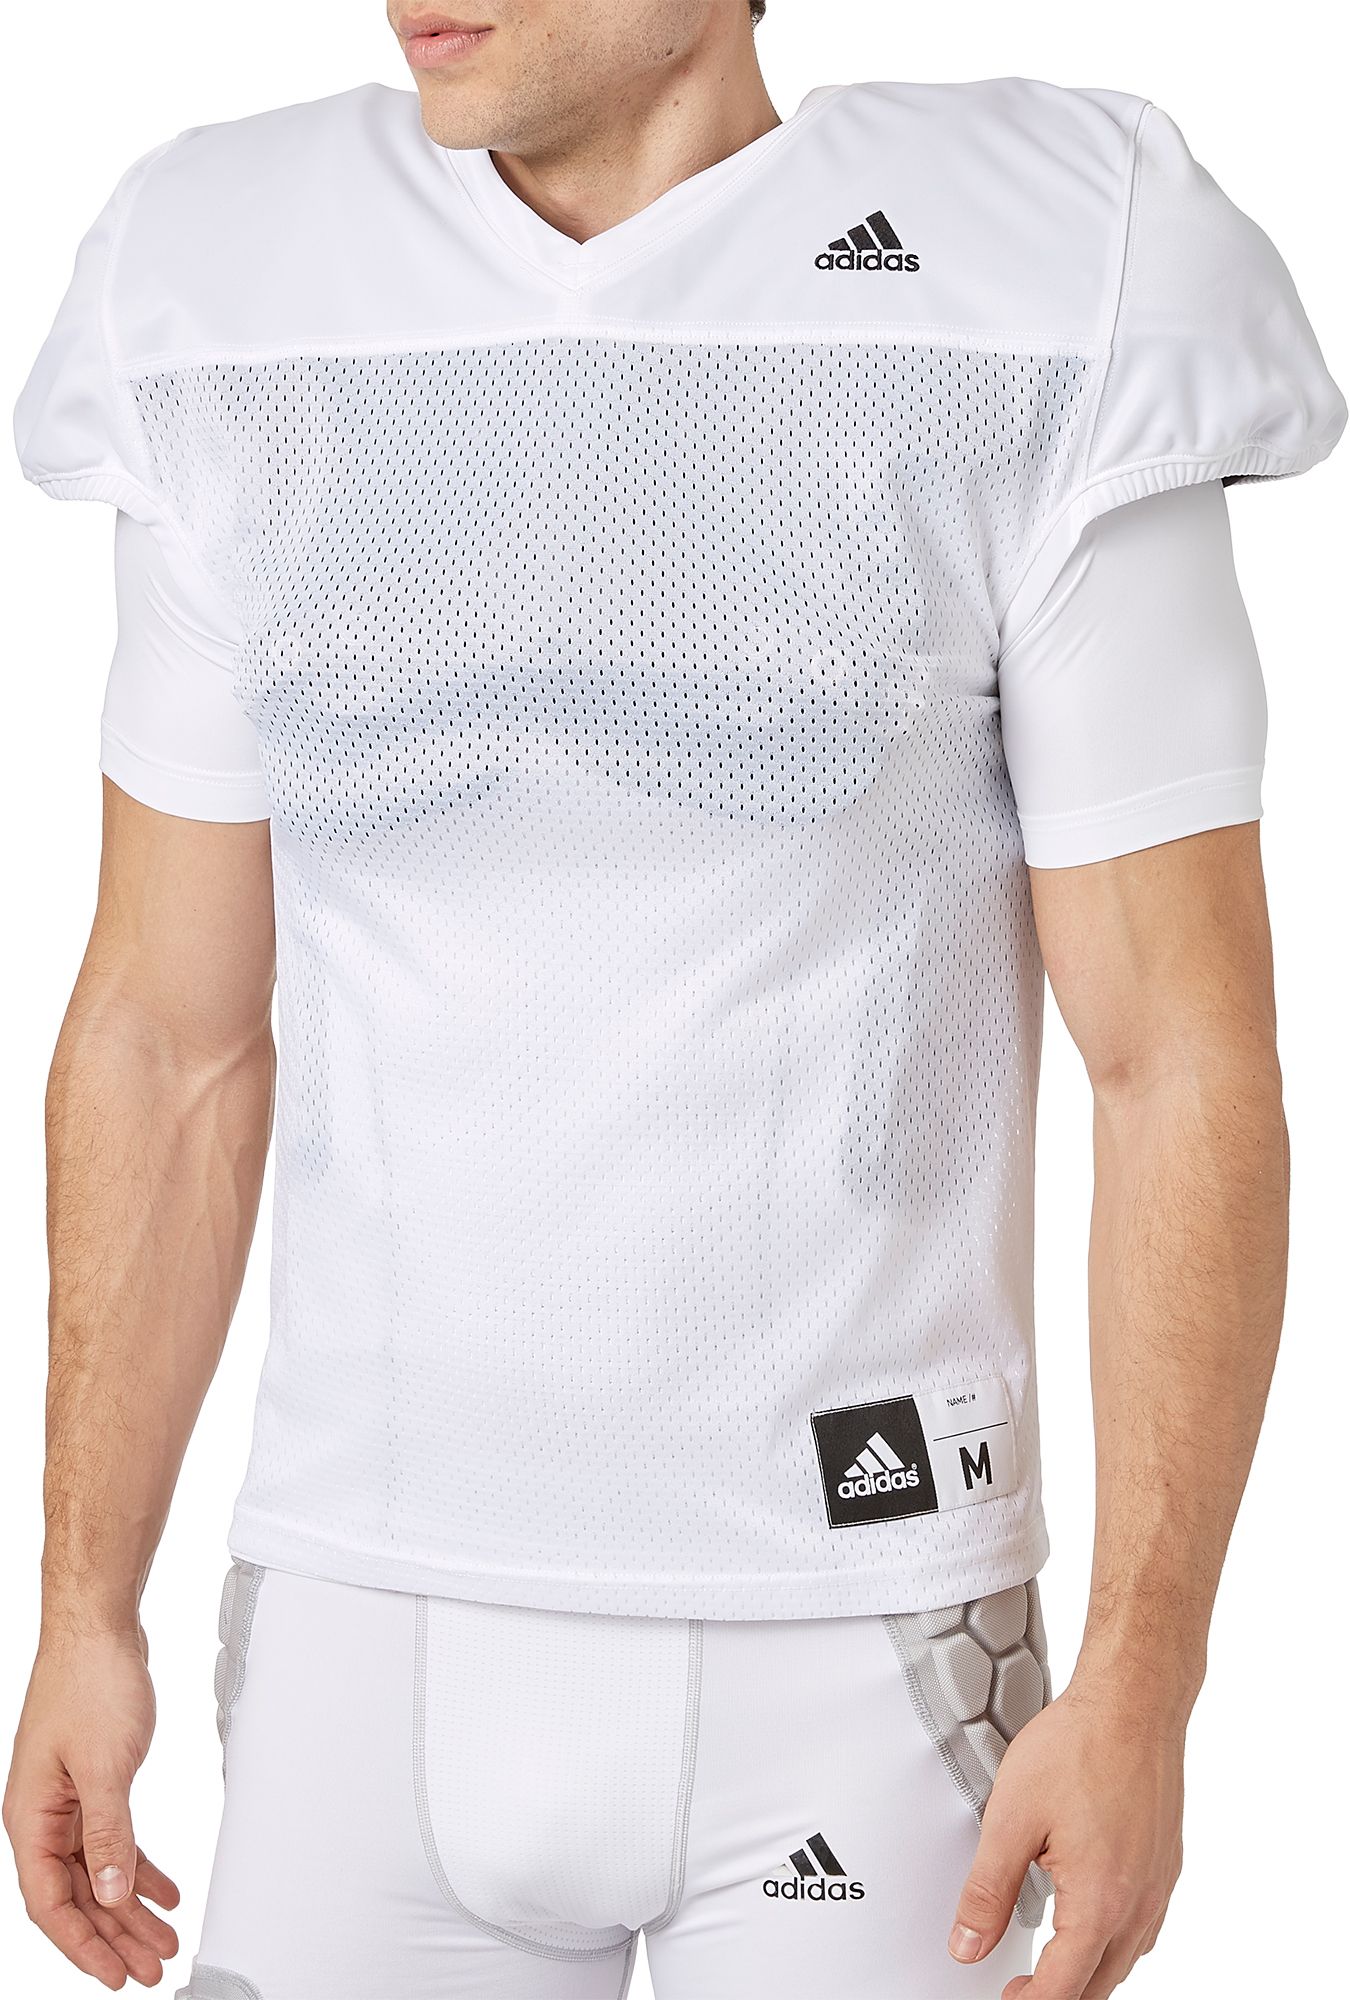 nike youth football practice jersey